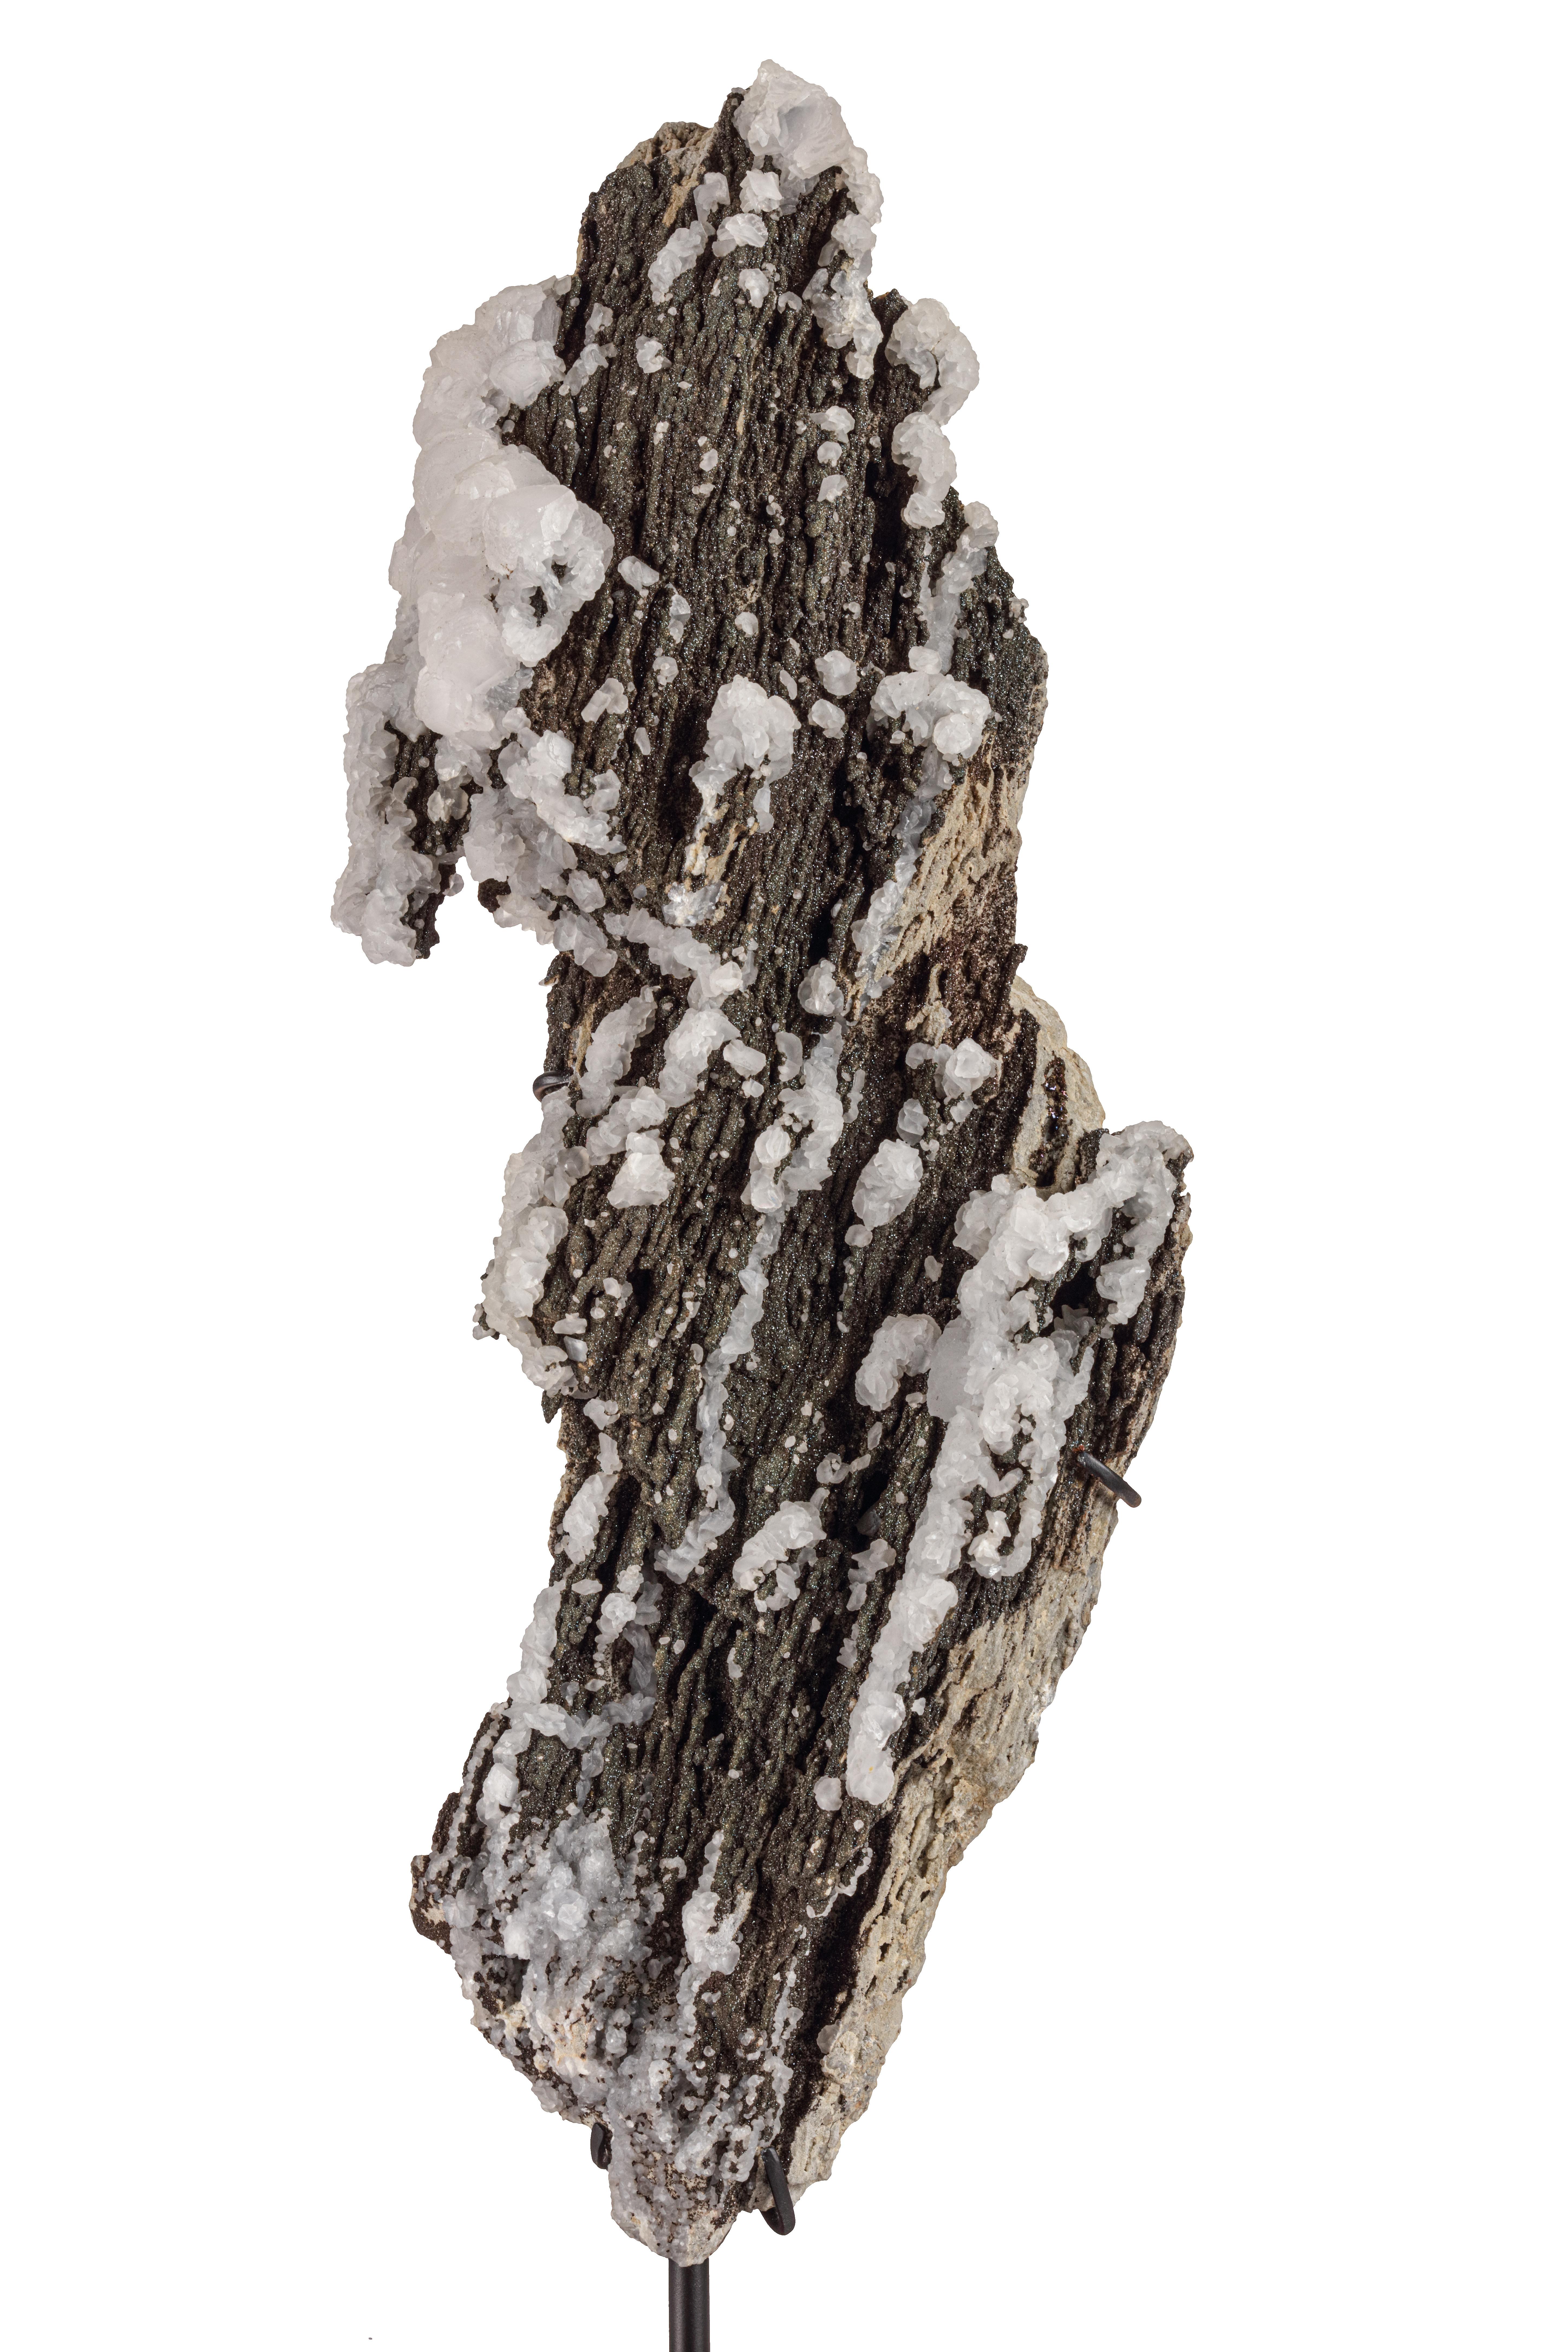 Balkan Collection of Splendid Mineral Specimens Naturally Formed as Snowy Mountains For Sale